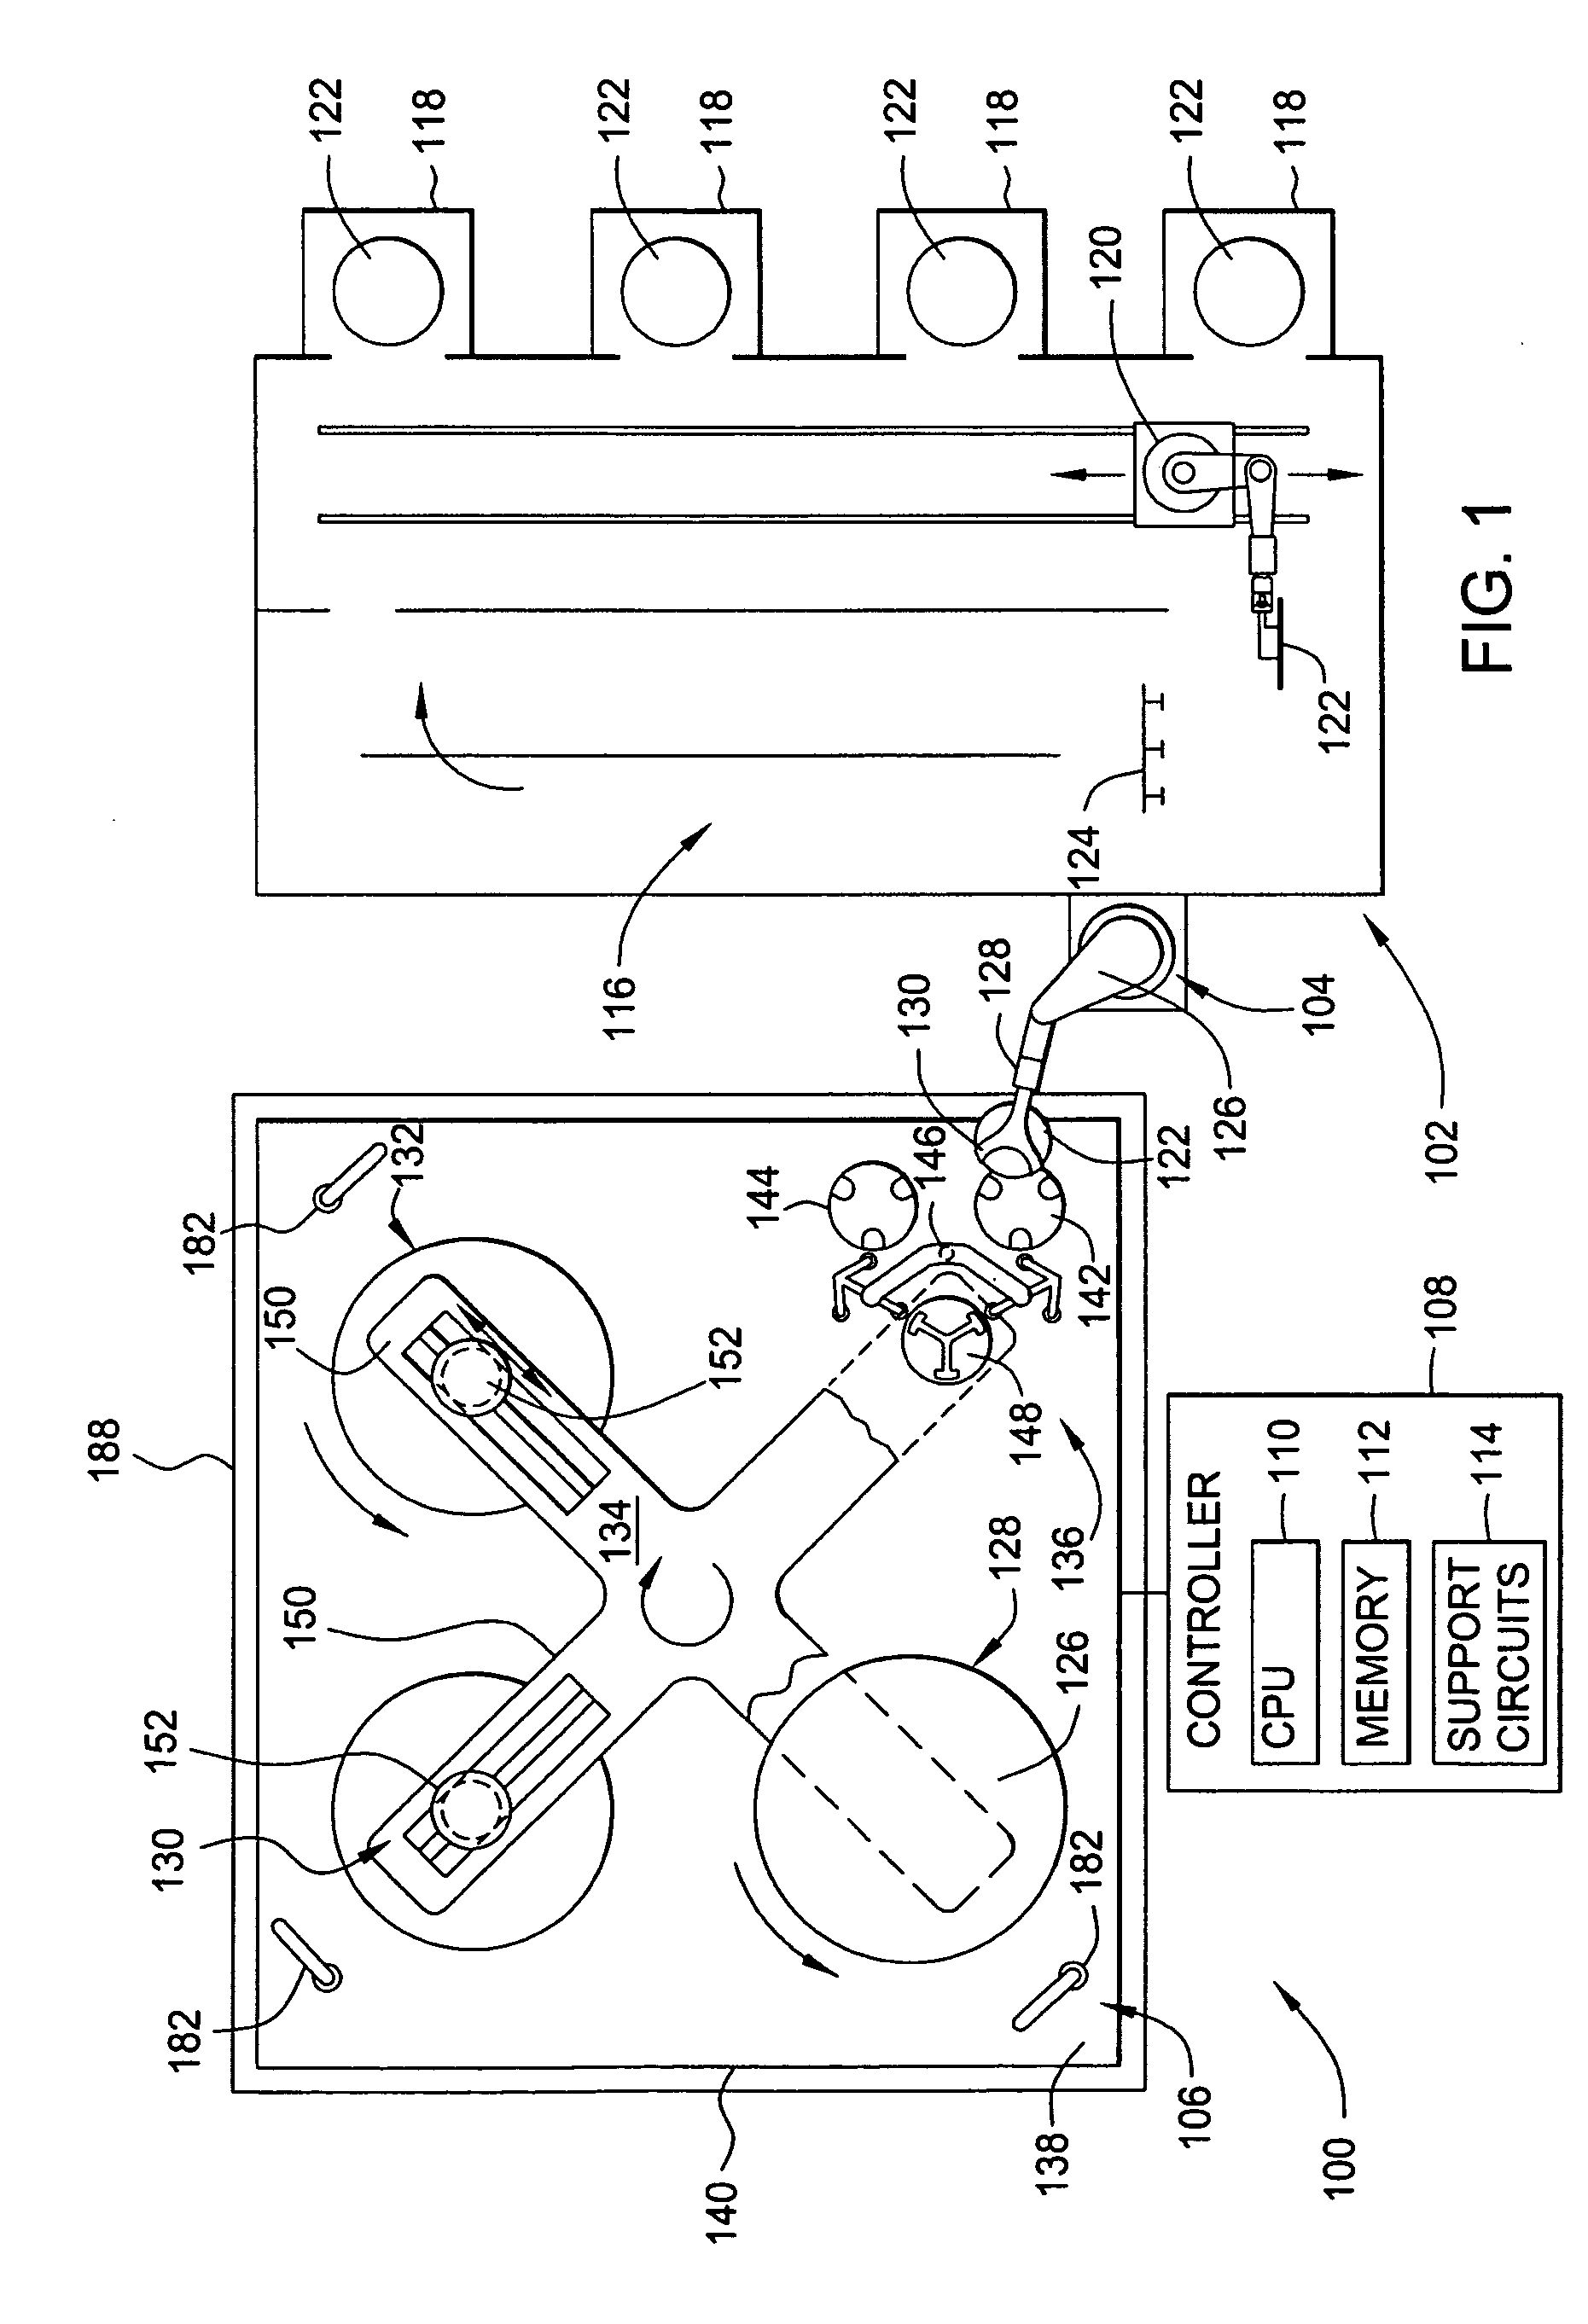 Method and apparatus for electrochemical mechanical processing